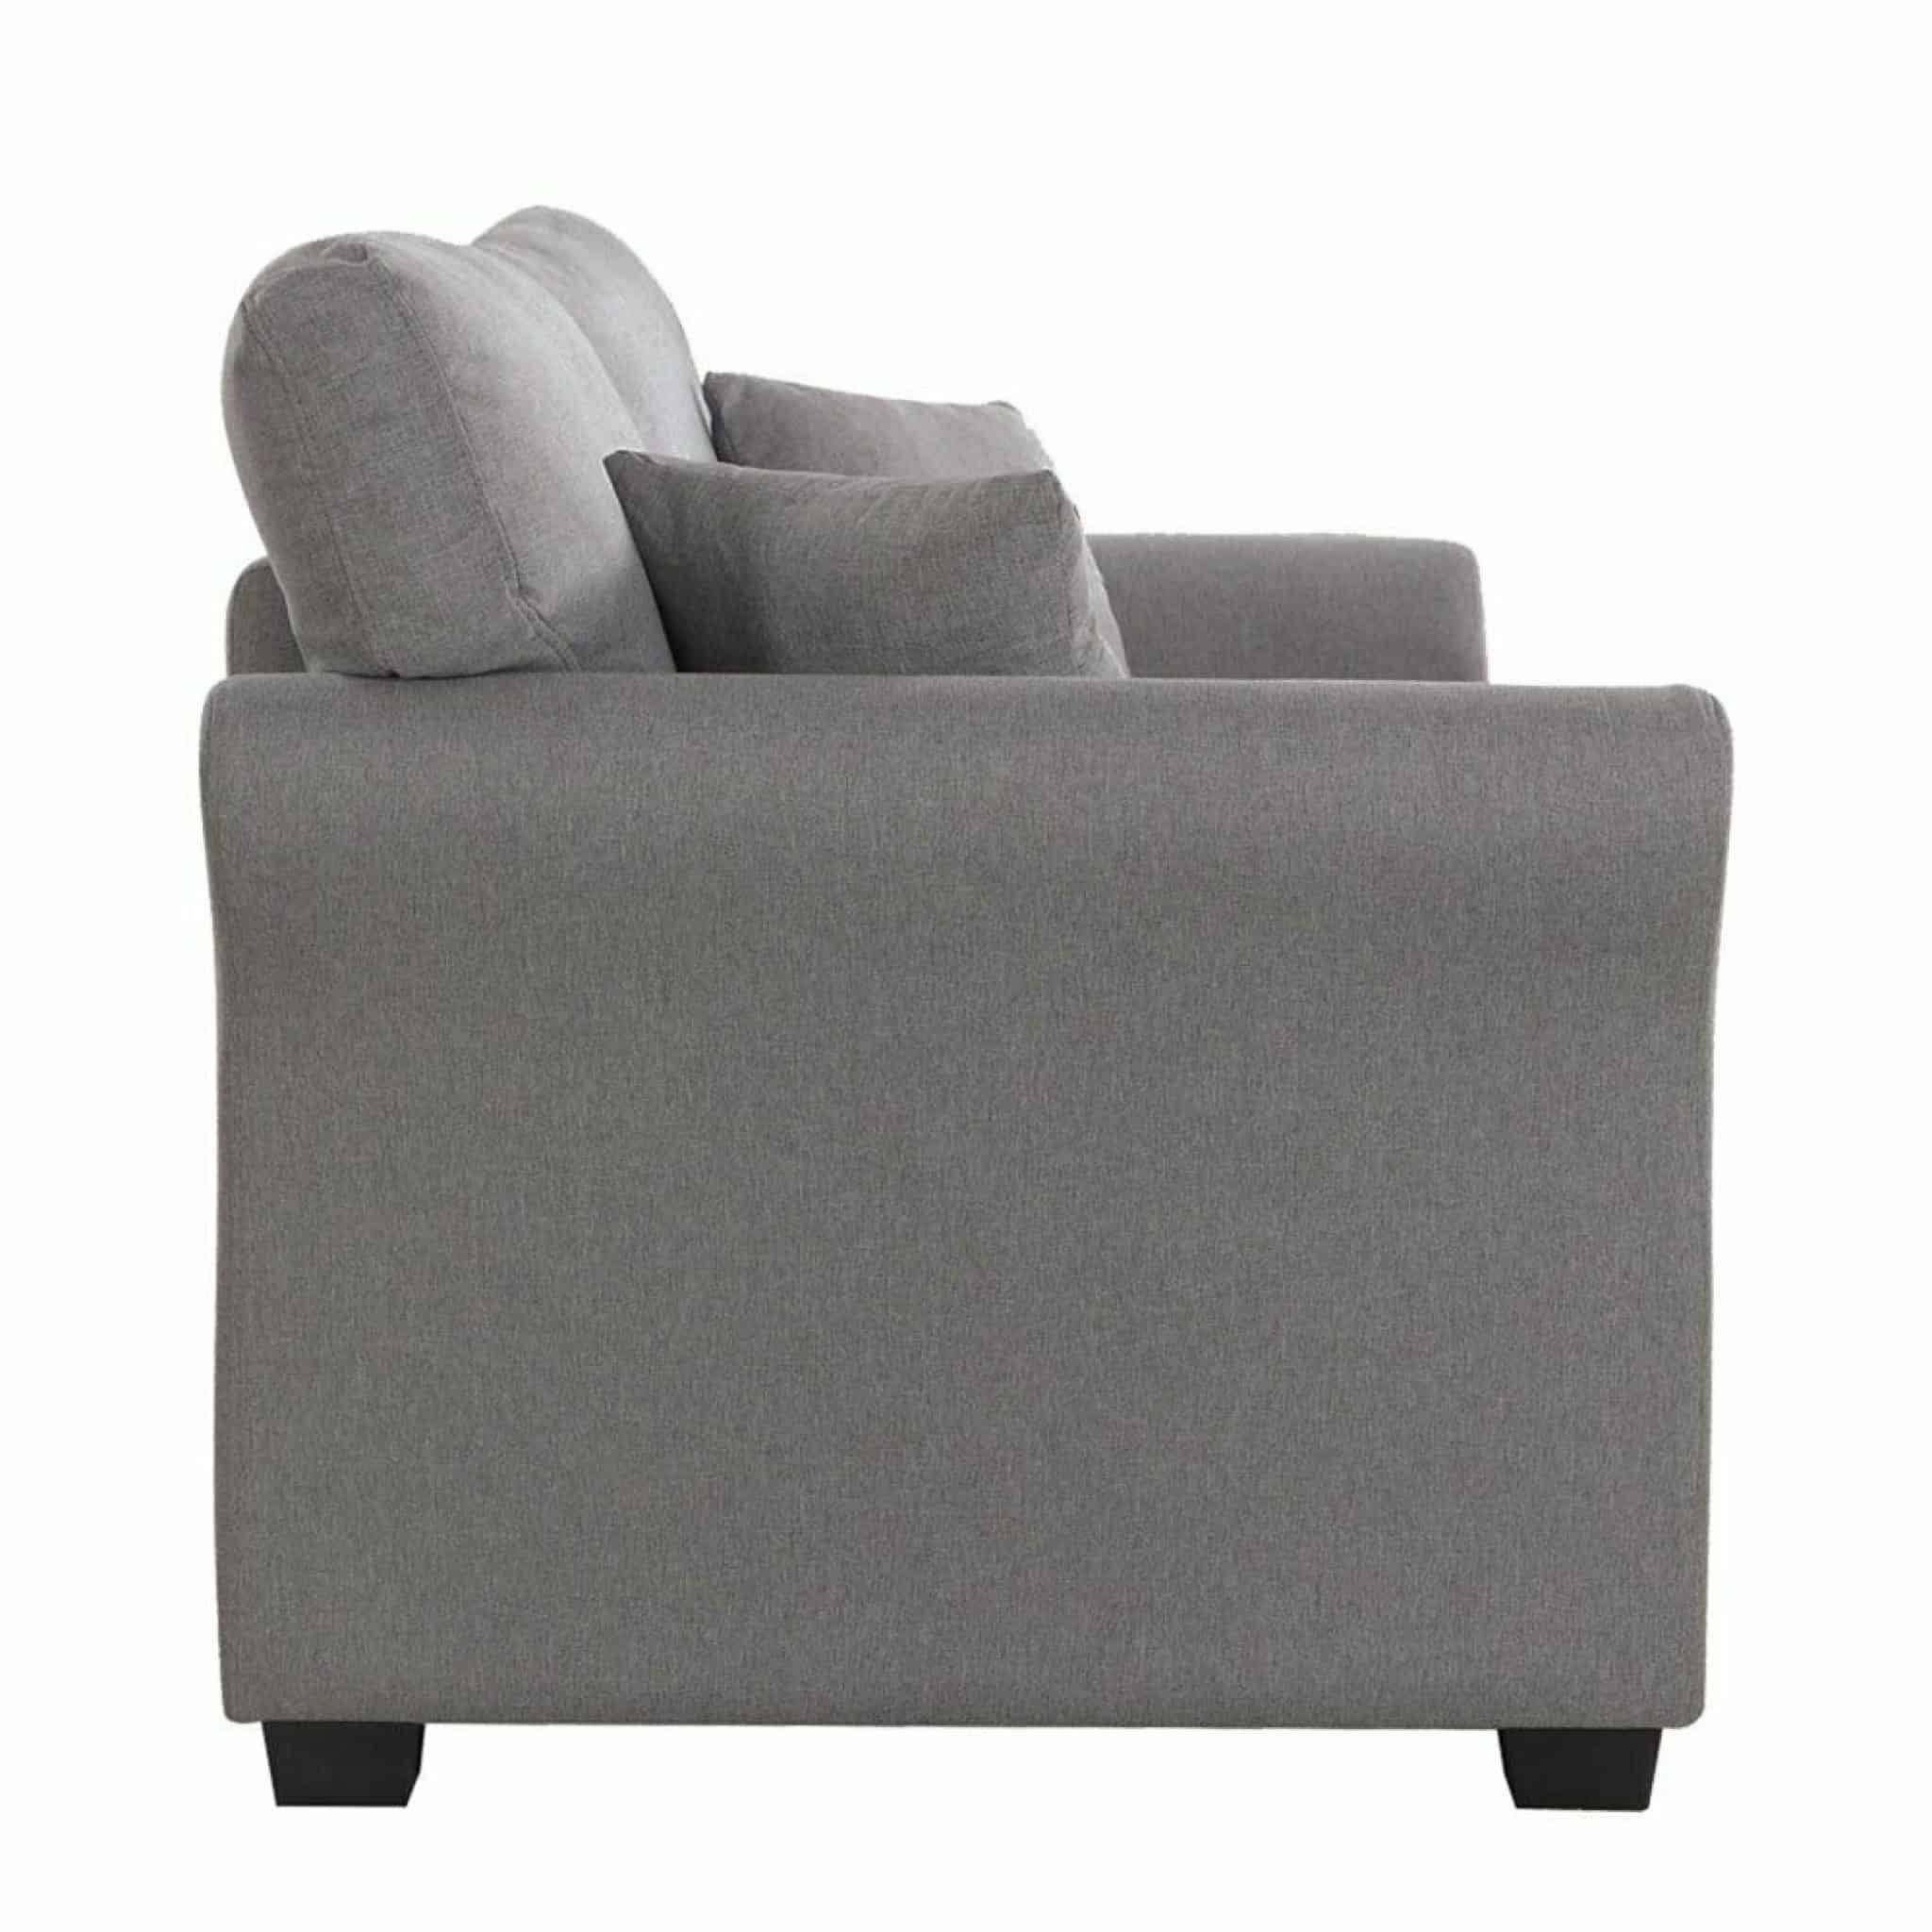 63" Bluish Grey Cozy Loveseat Sofa W/ 2 Accent Pillows – Affordable For Sofas In Bluish Grey (Gallery 16 of 20)